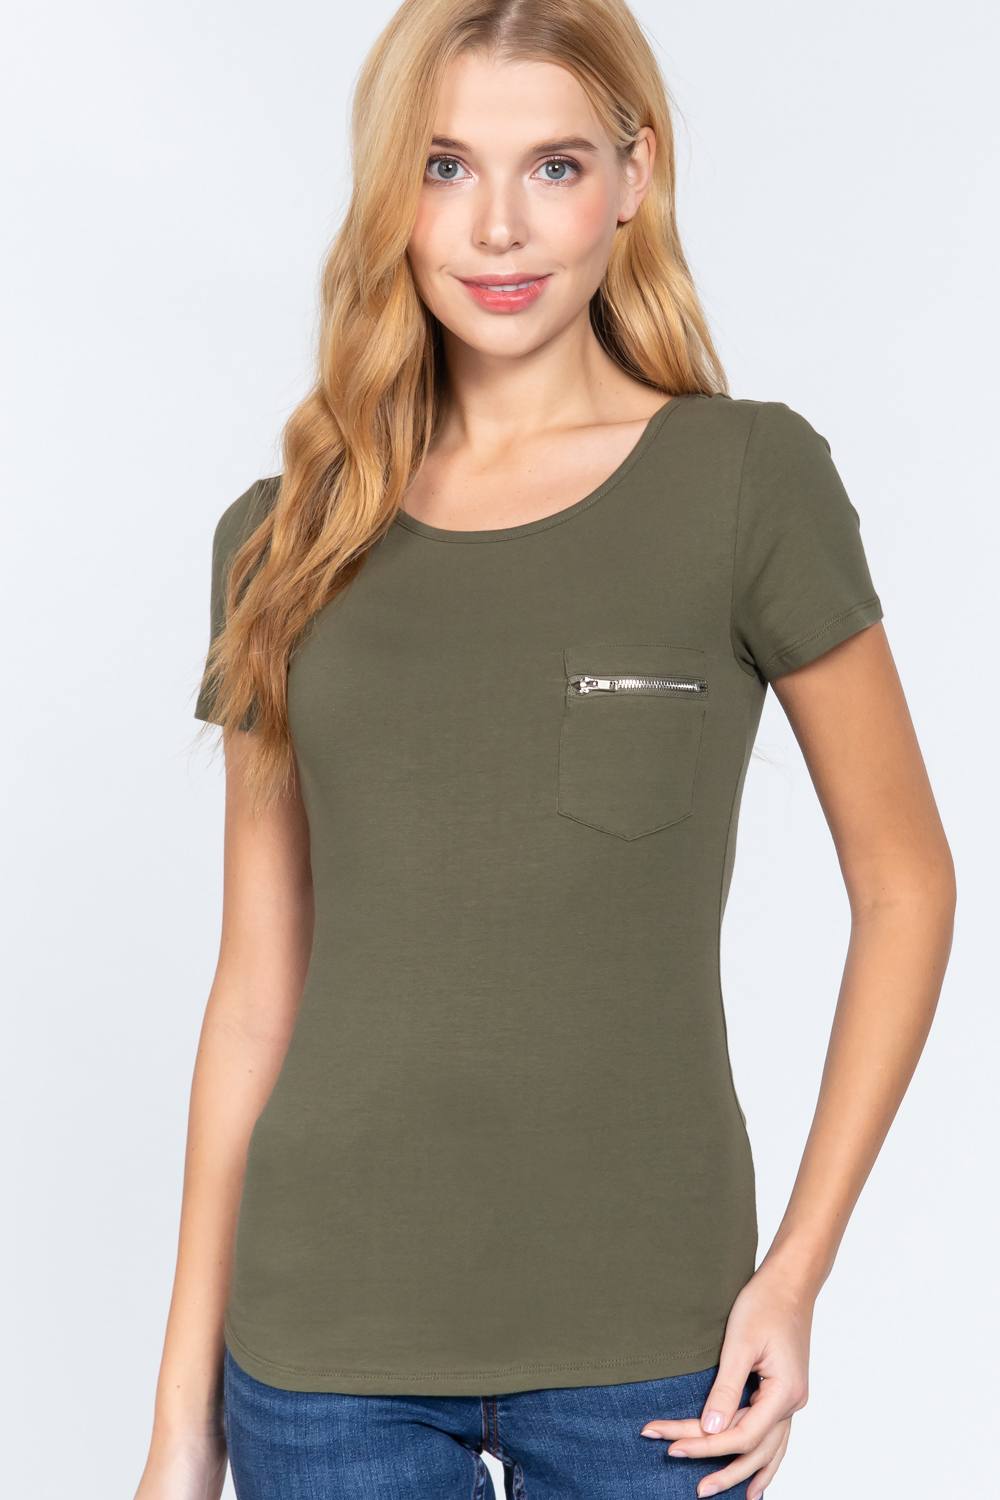 Short Sleeve Top with Zipper Pocket in Olive Green